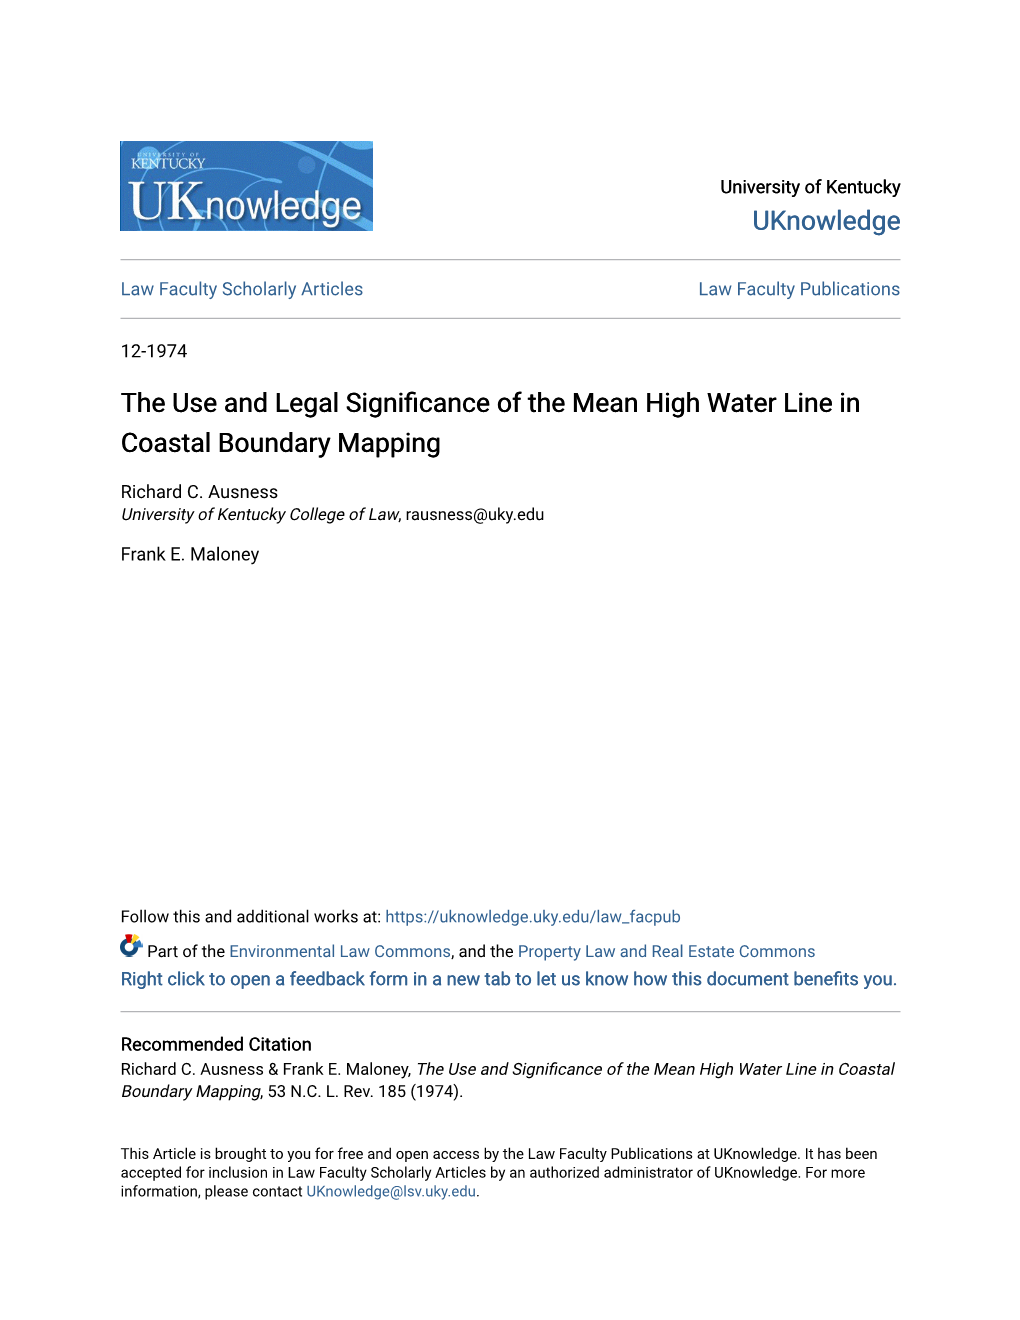 The Use and Legal Significance of the Mean High Water Line in Coastal Boundary Mapping Frank E